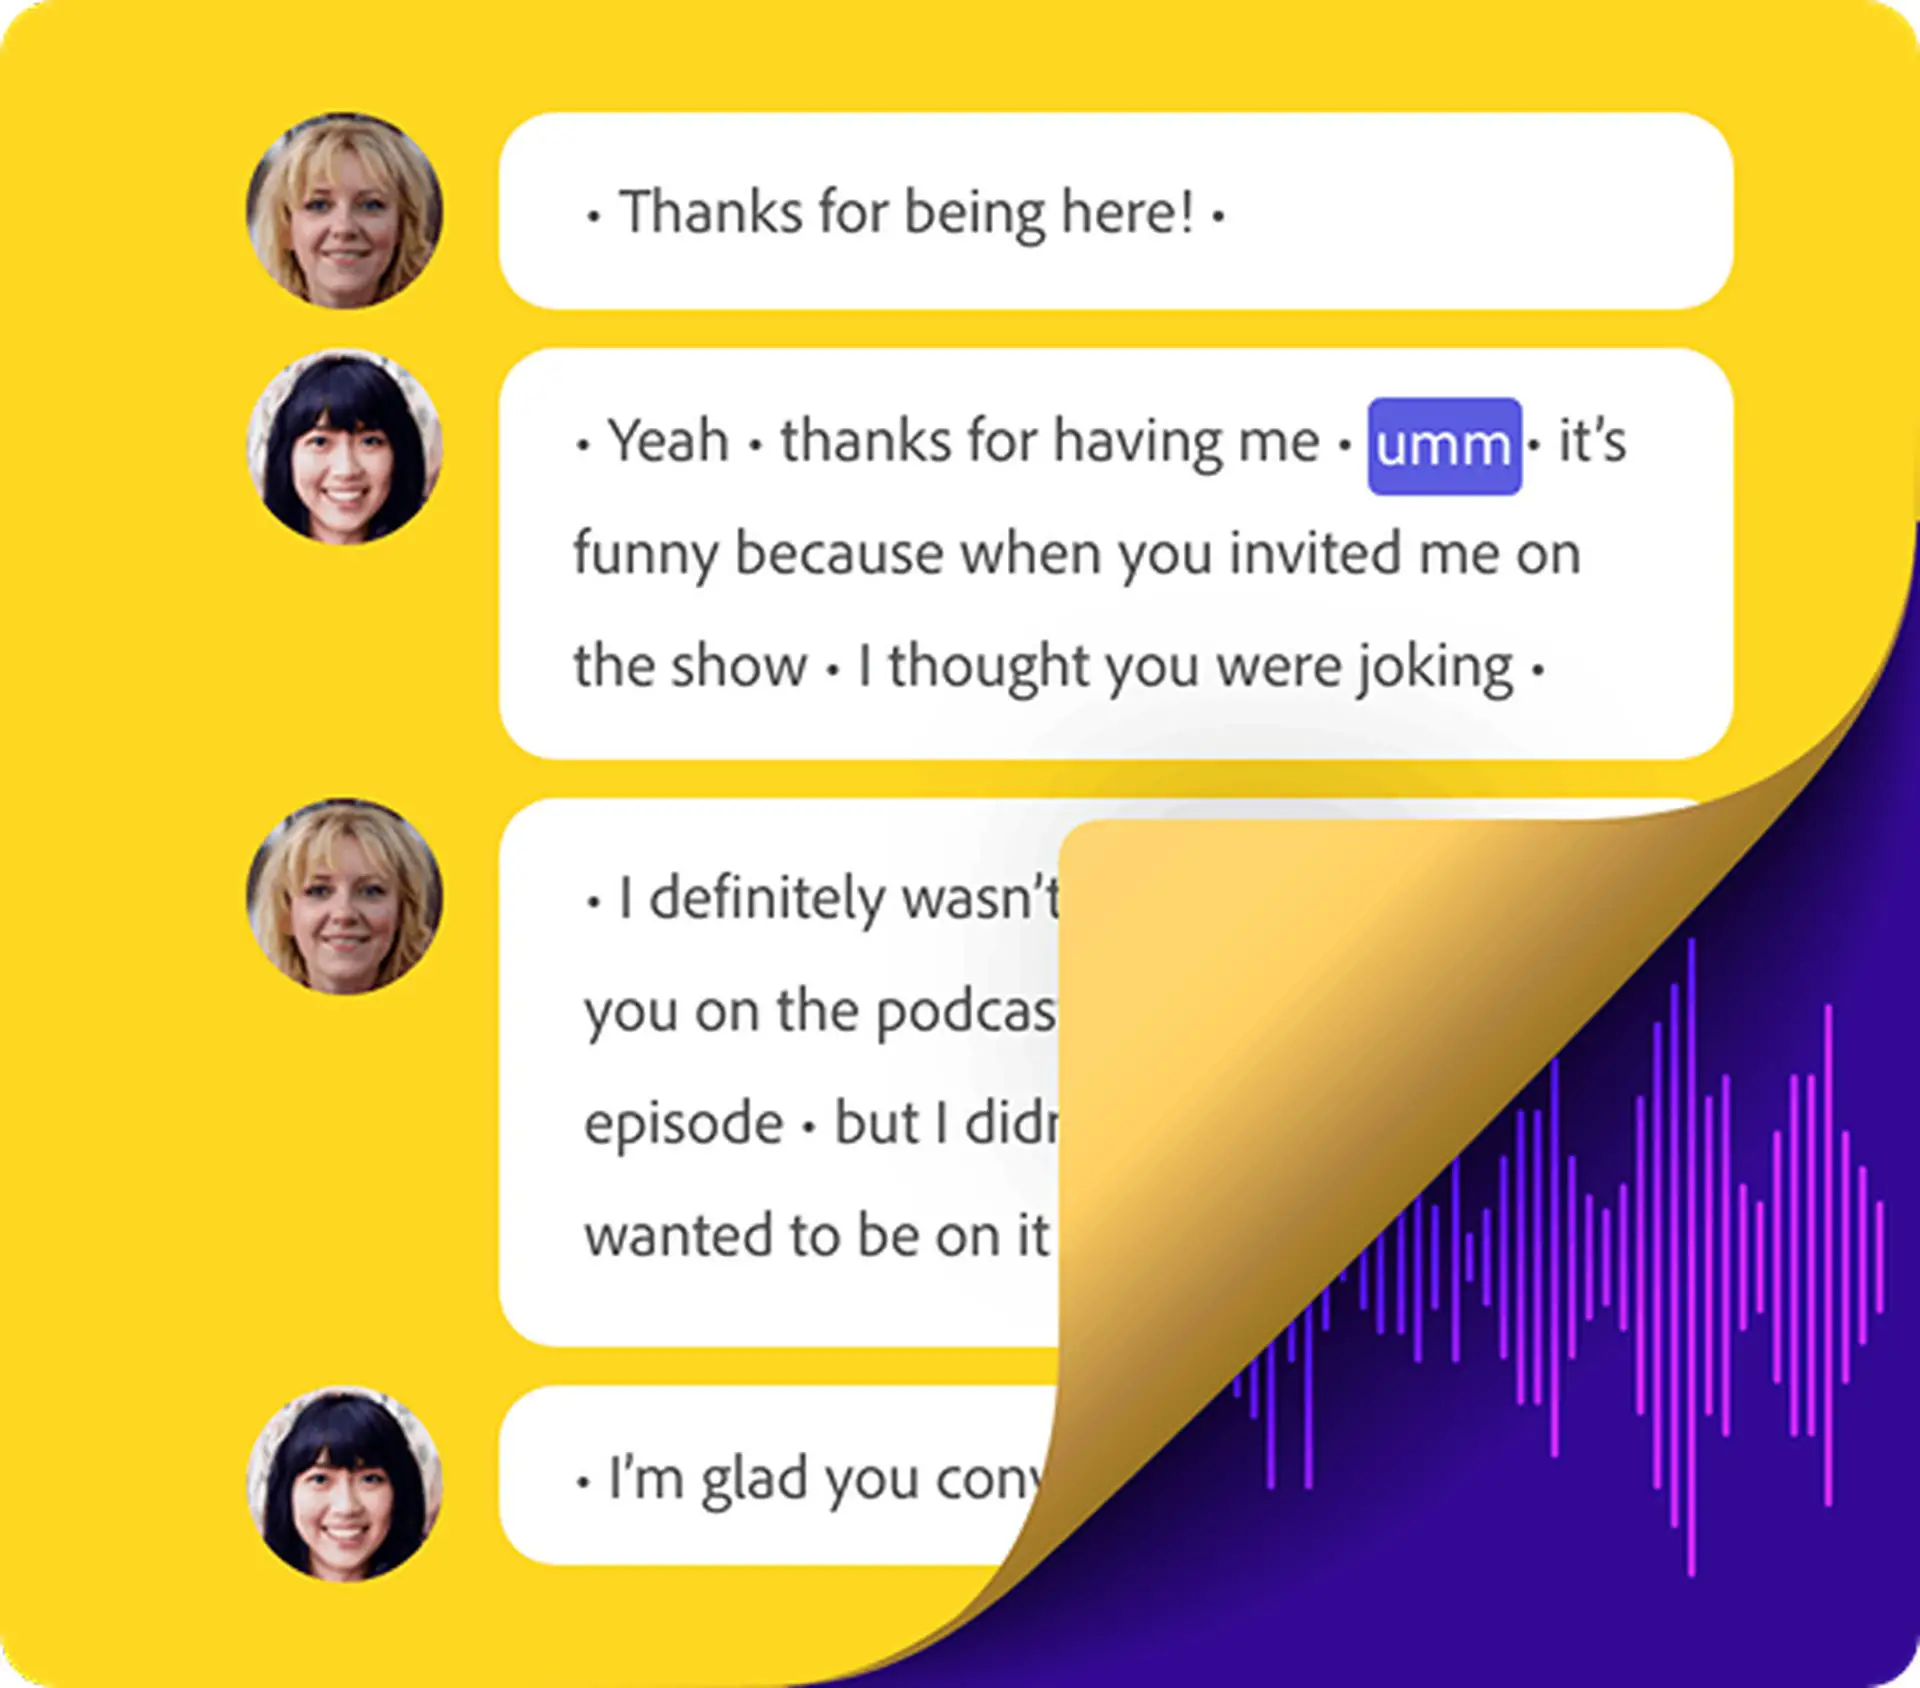 Experience the future of podcasting with Adobe Podcast AI